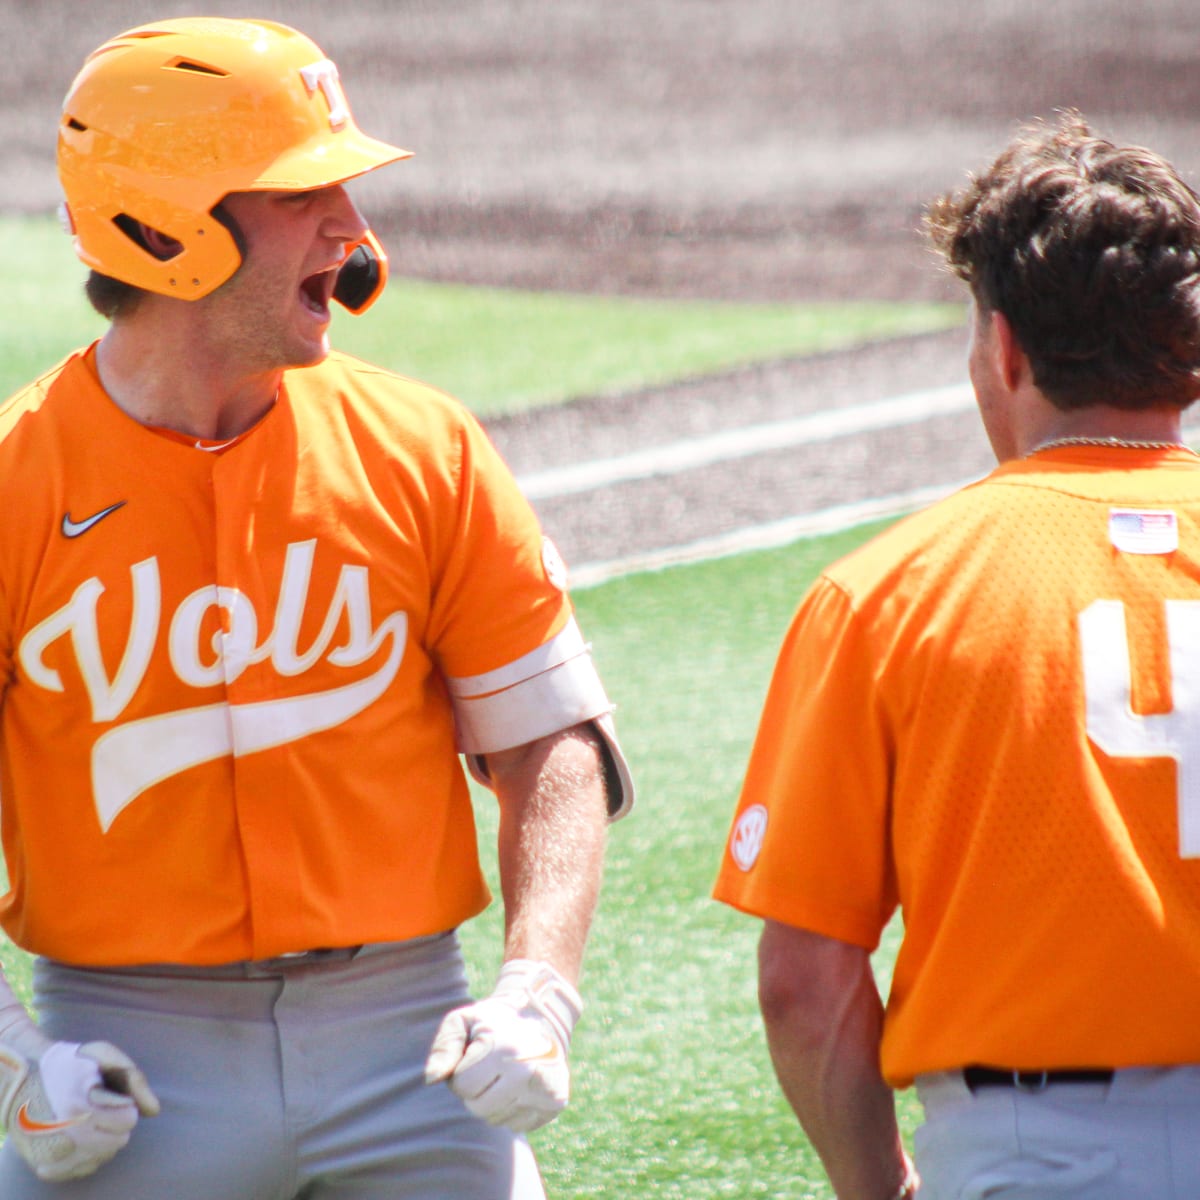 Baseball Vols off to 7-0 start by a combined score of 117-7